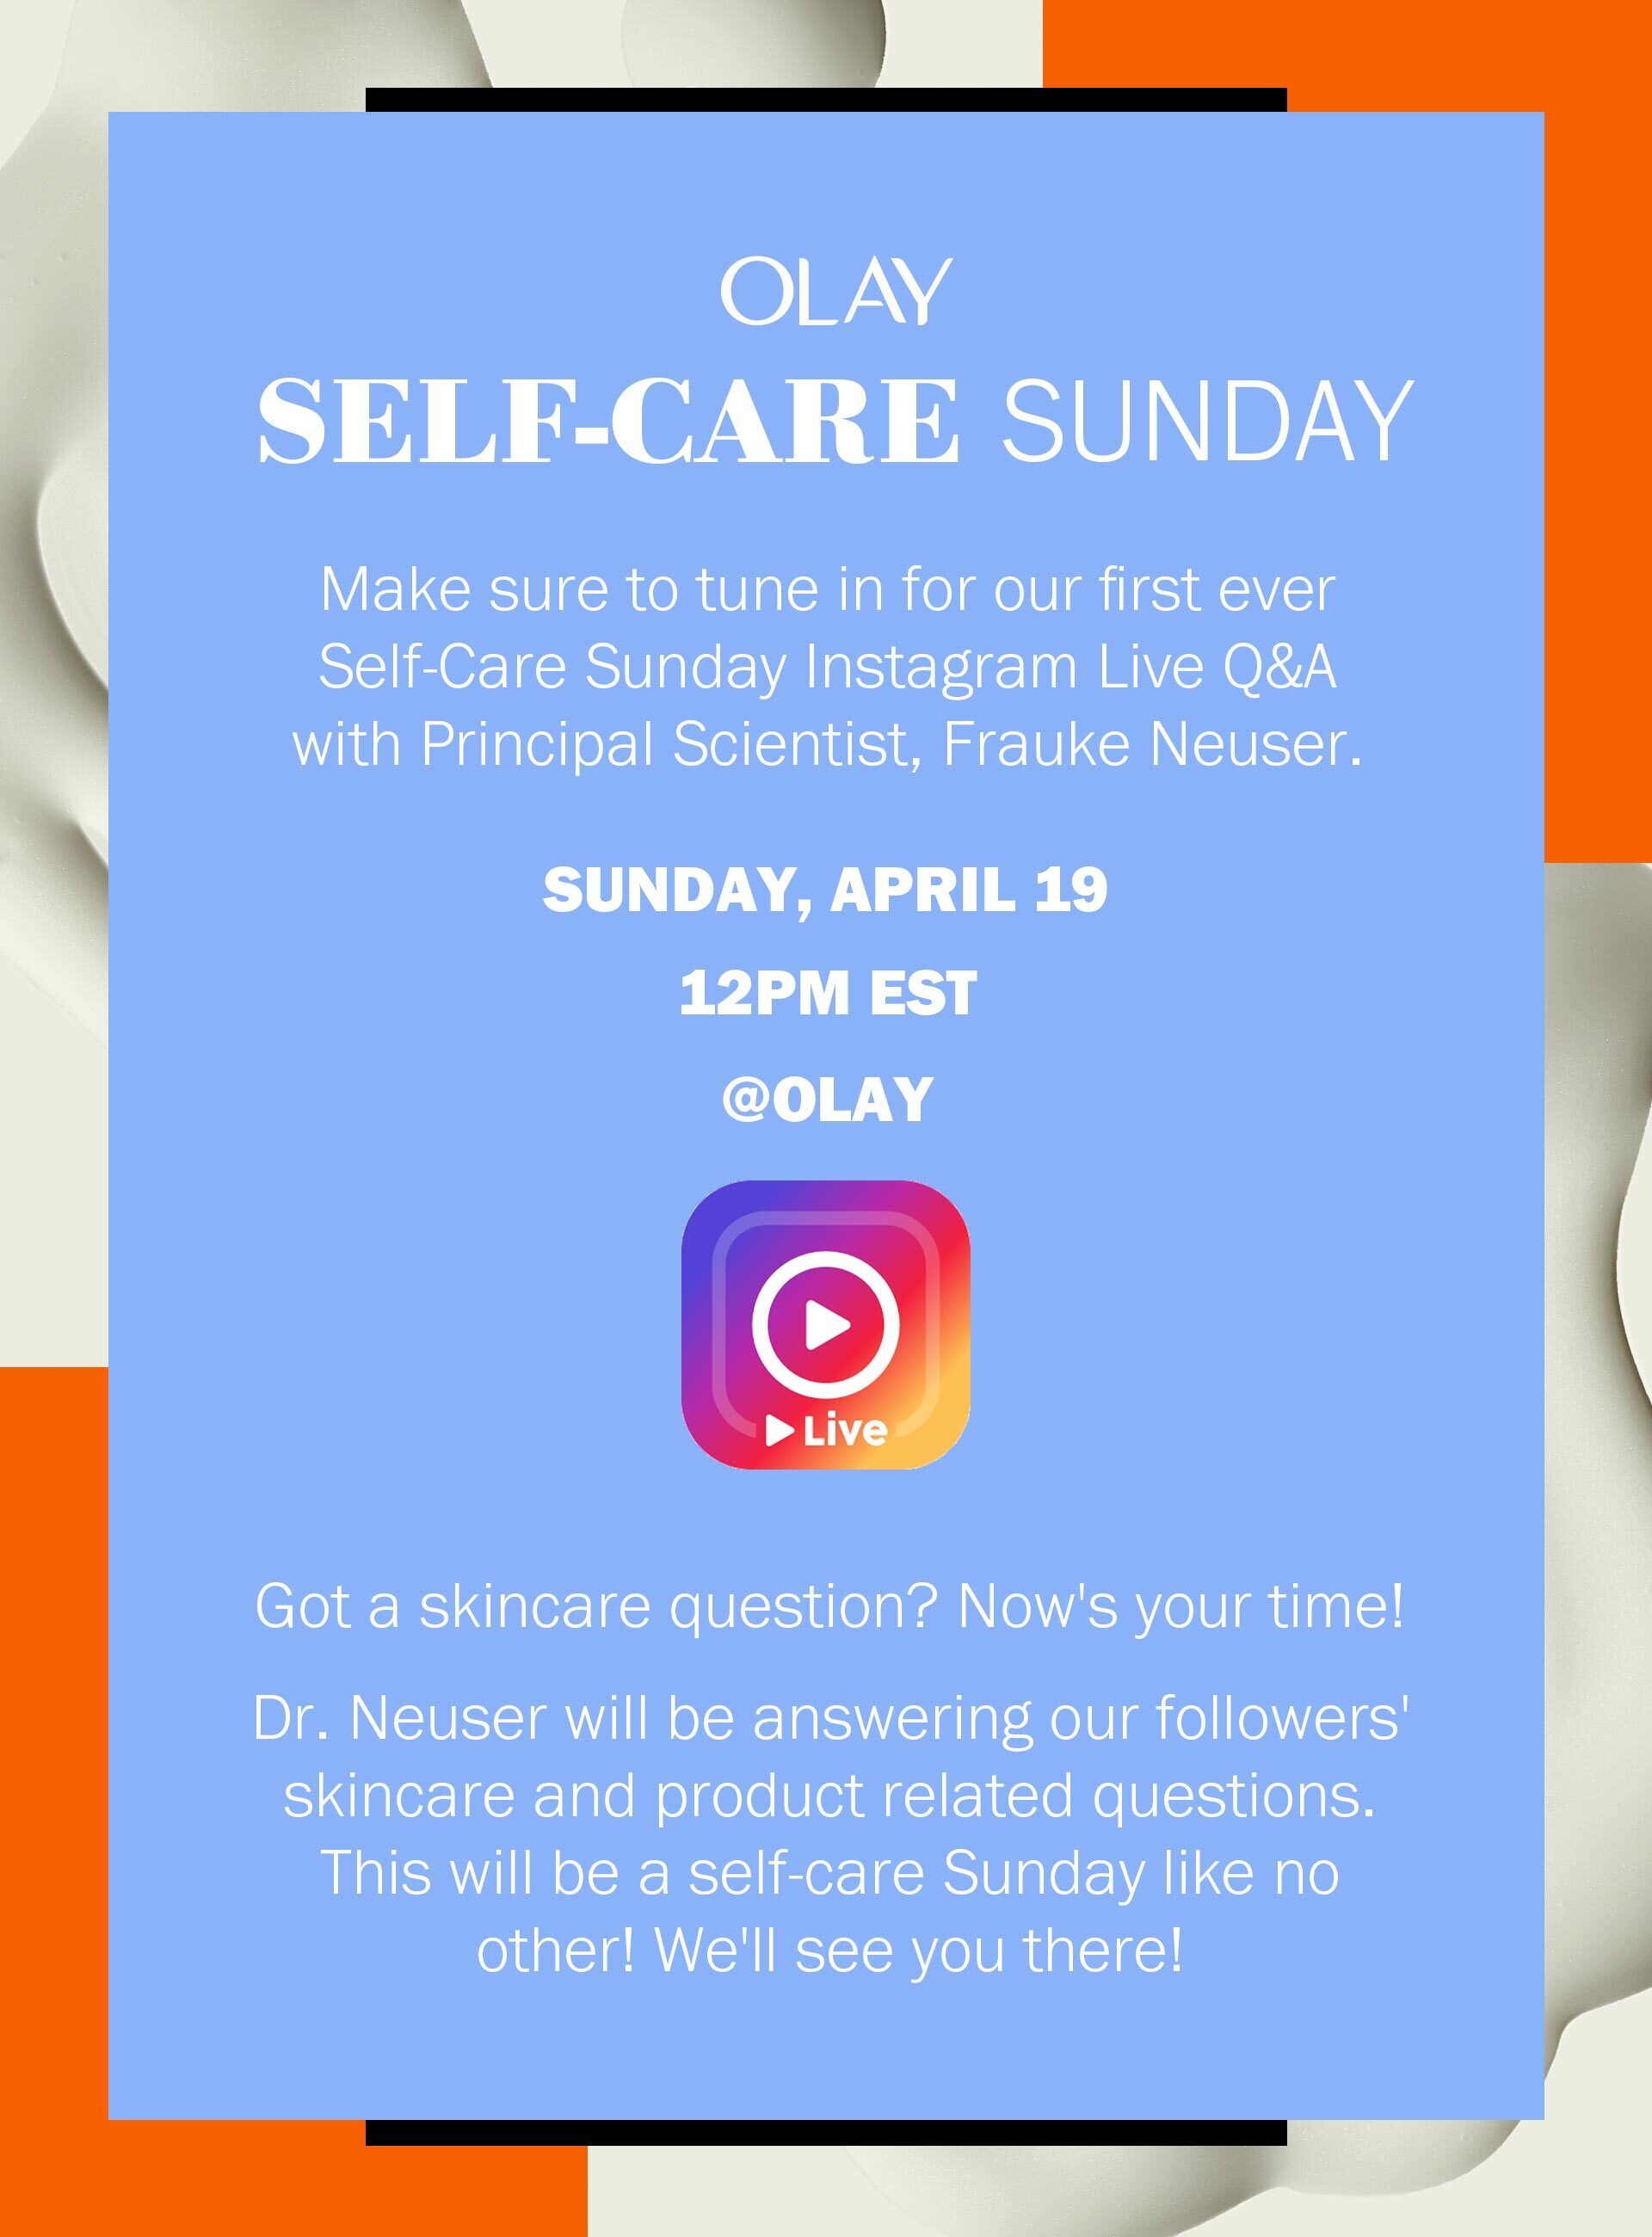 Check out self care sunday on OLAY's Instagram